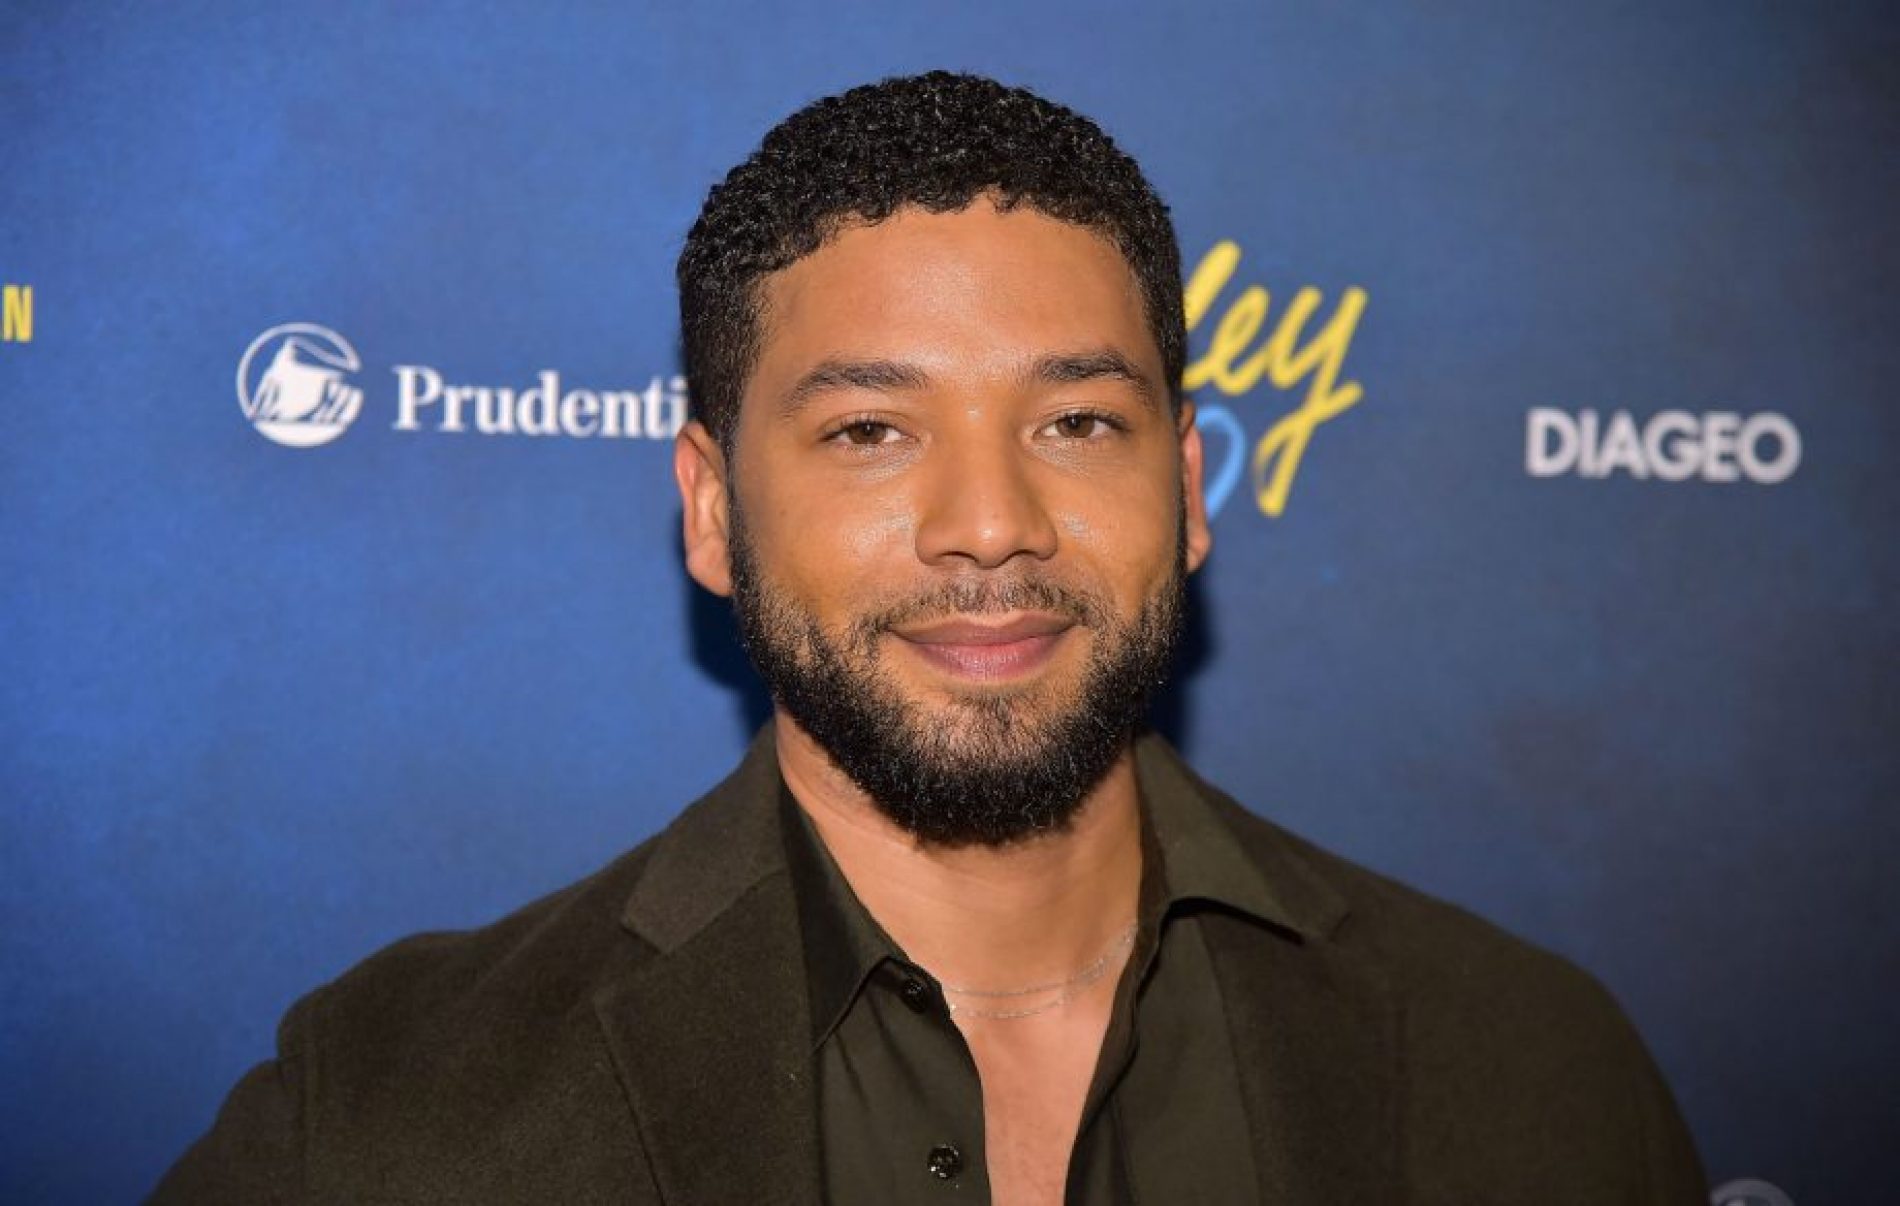 Jussie Smollett Being Investigated As New Reports Emerge That He Orchestrated His Own Attack